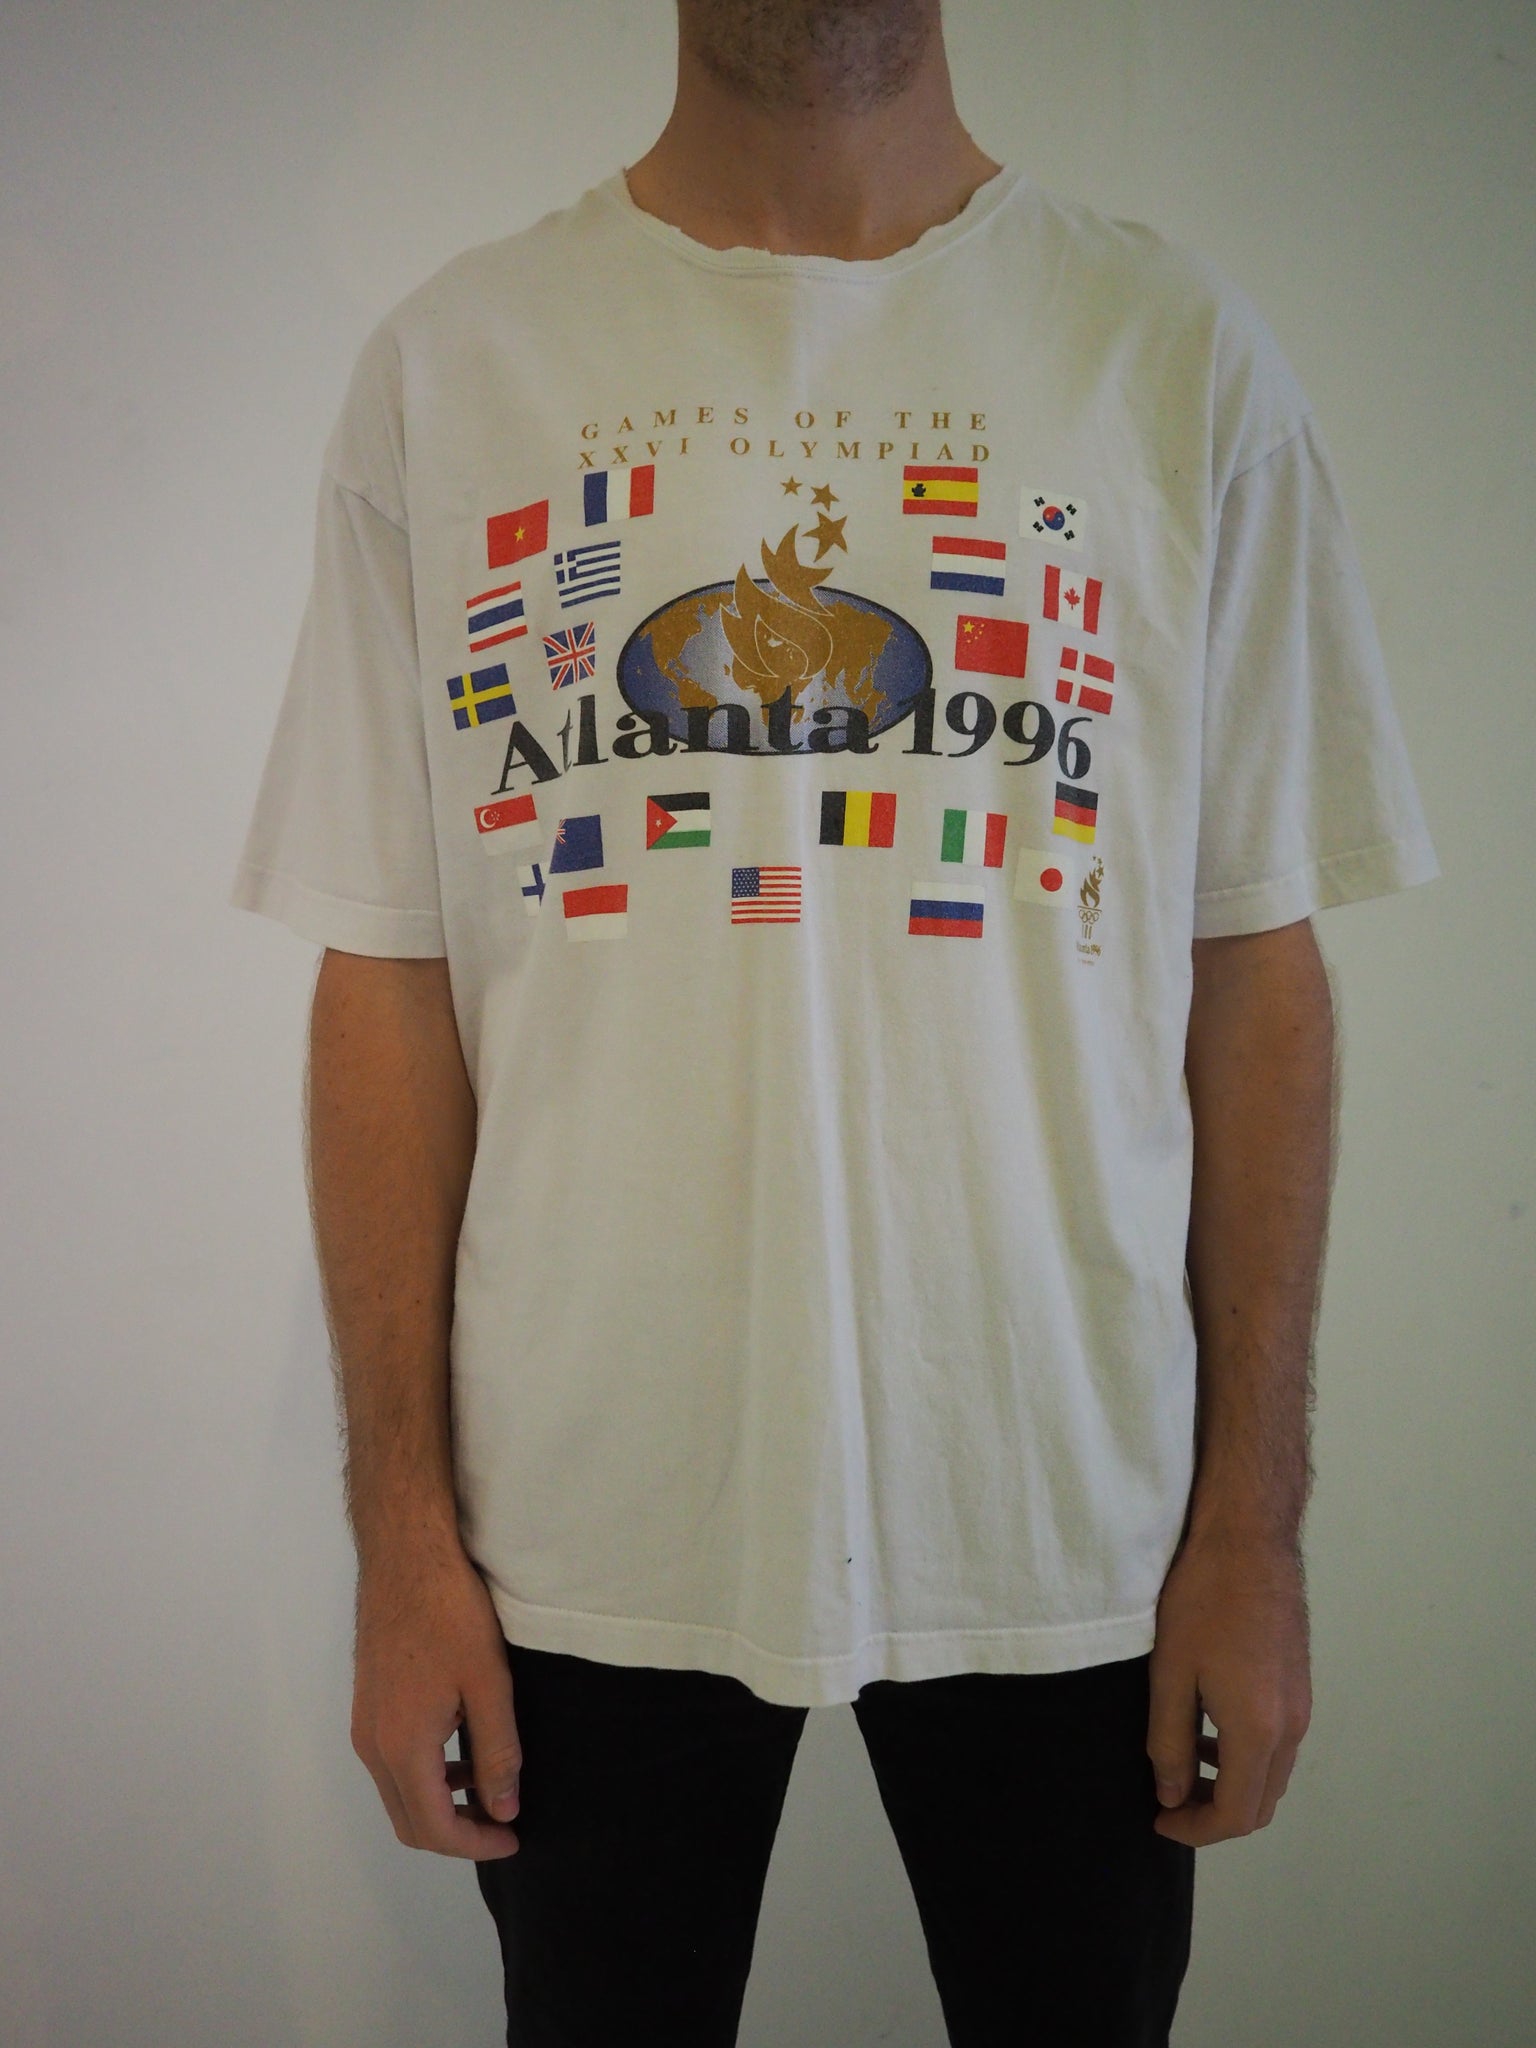 Atlanta 1996 Olympics White T-shirt with front large graphic